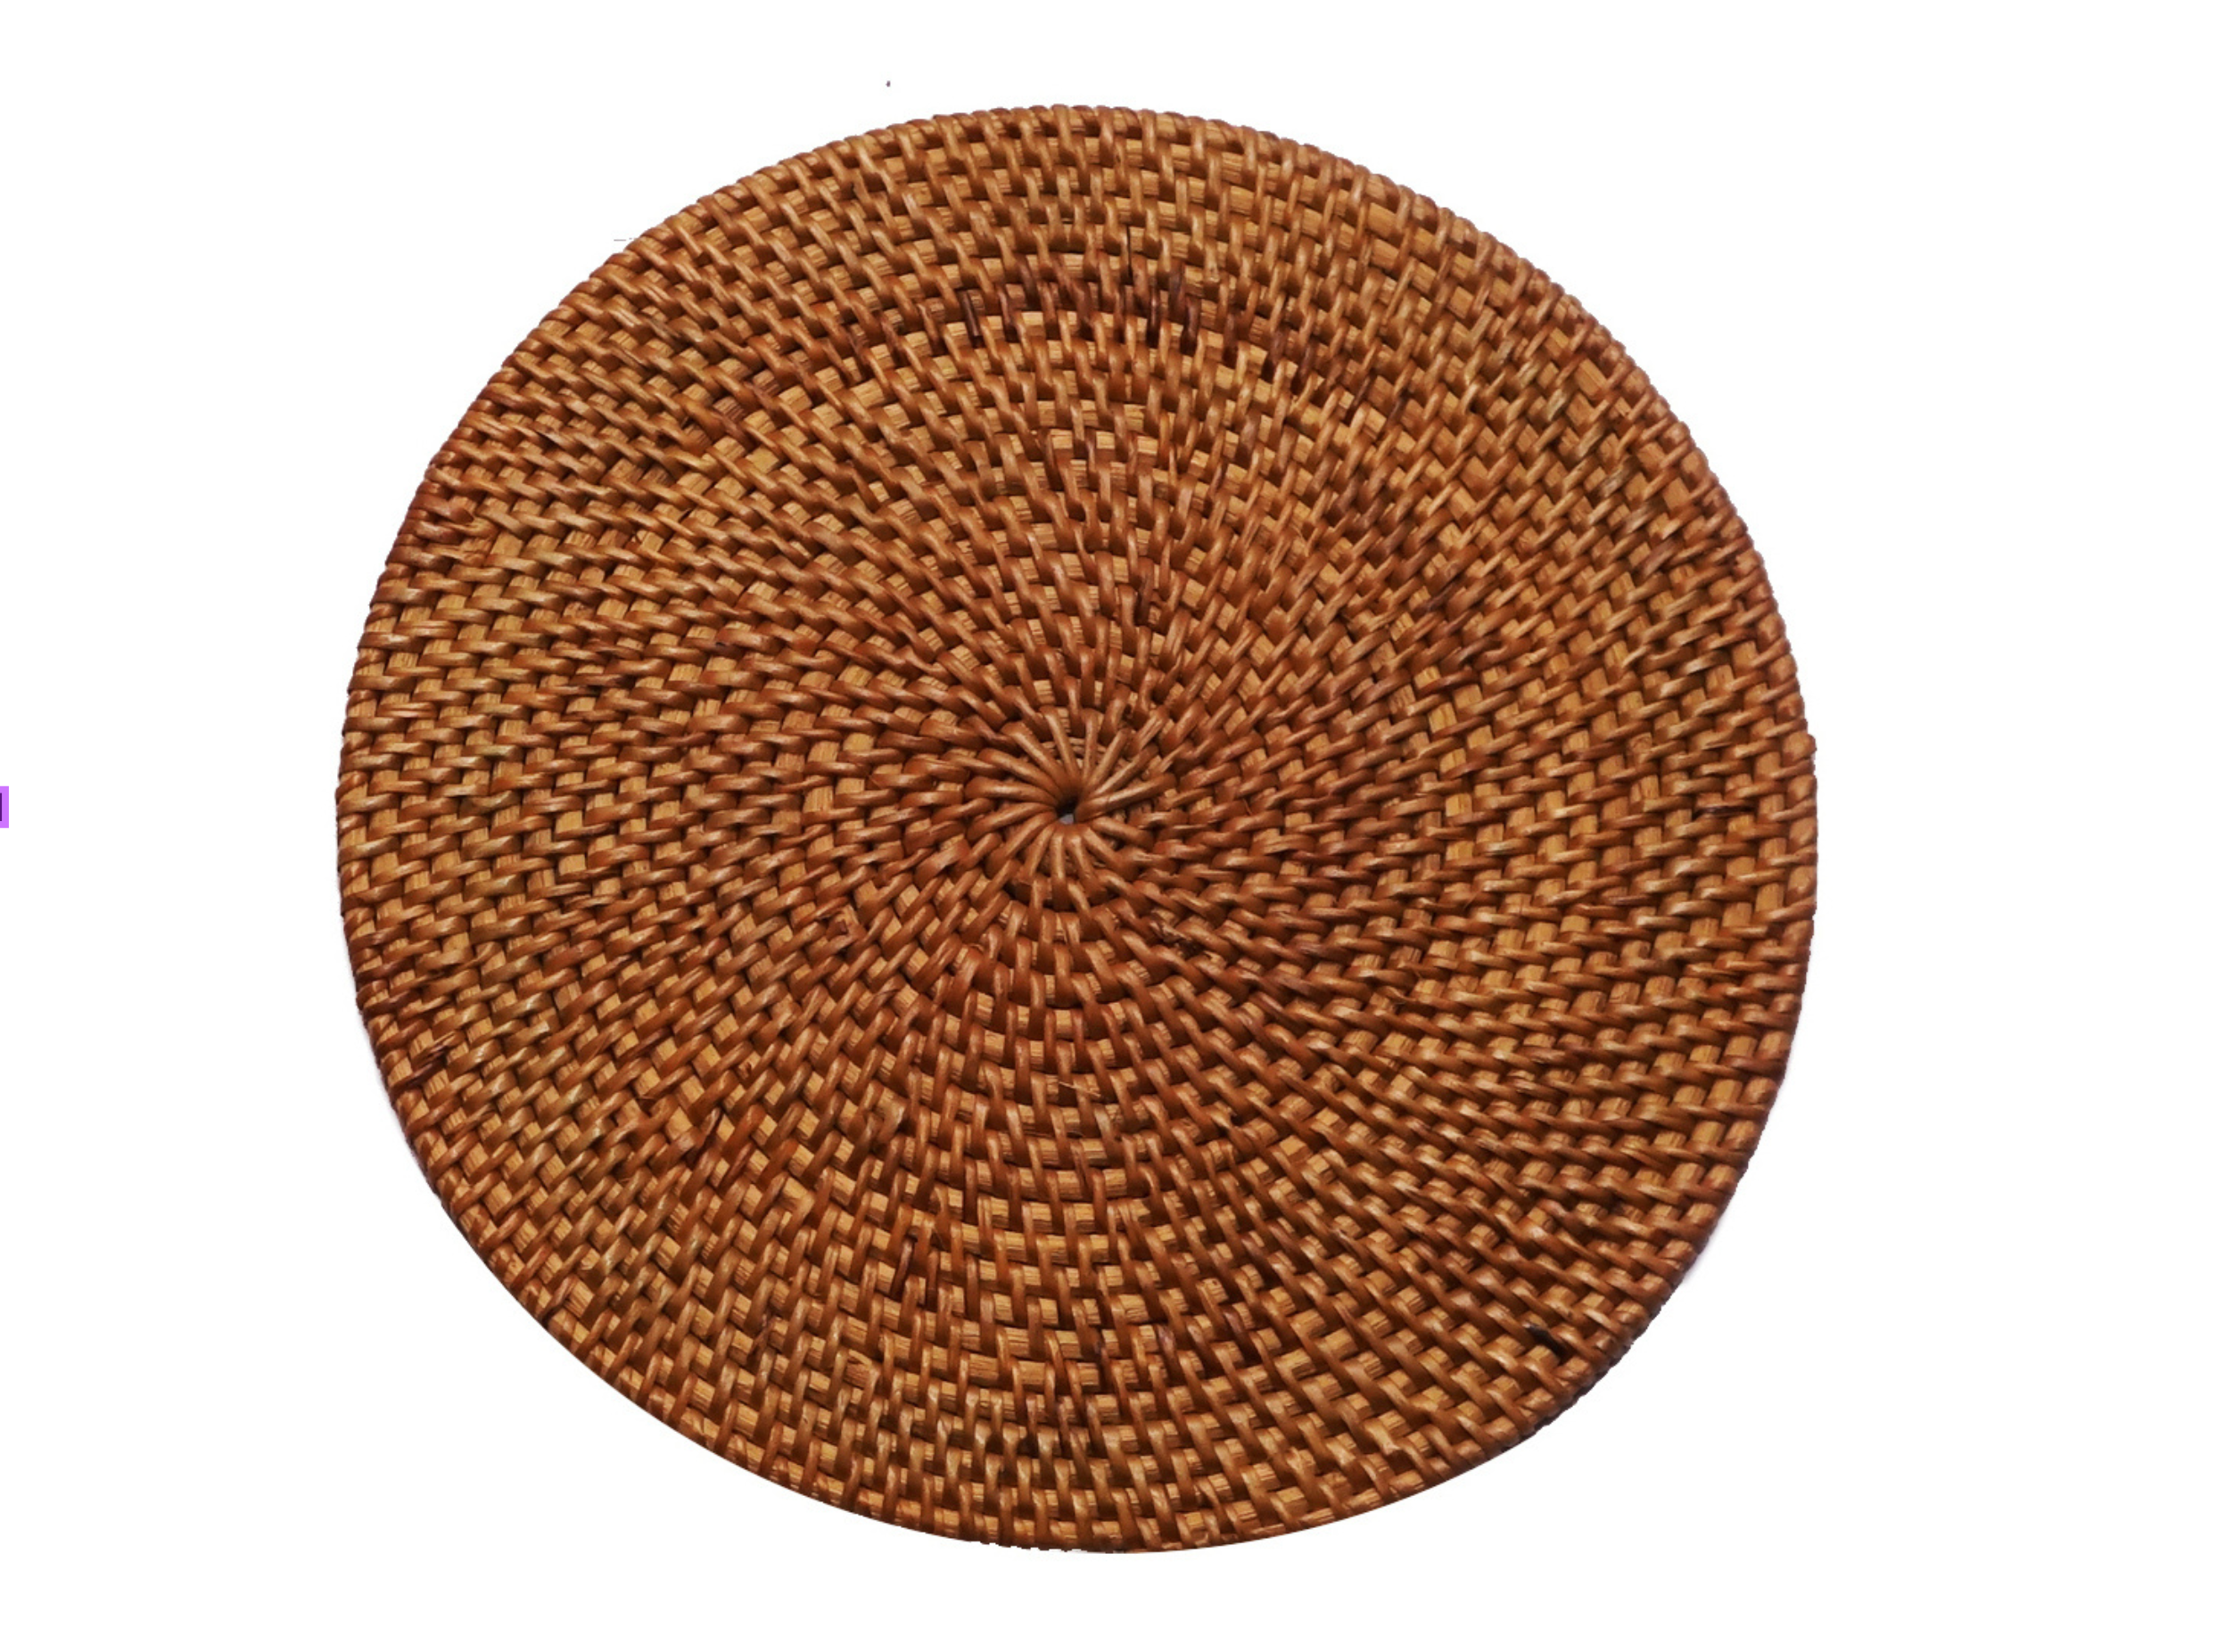 Placemat 1 Small by Riani Rattan